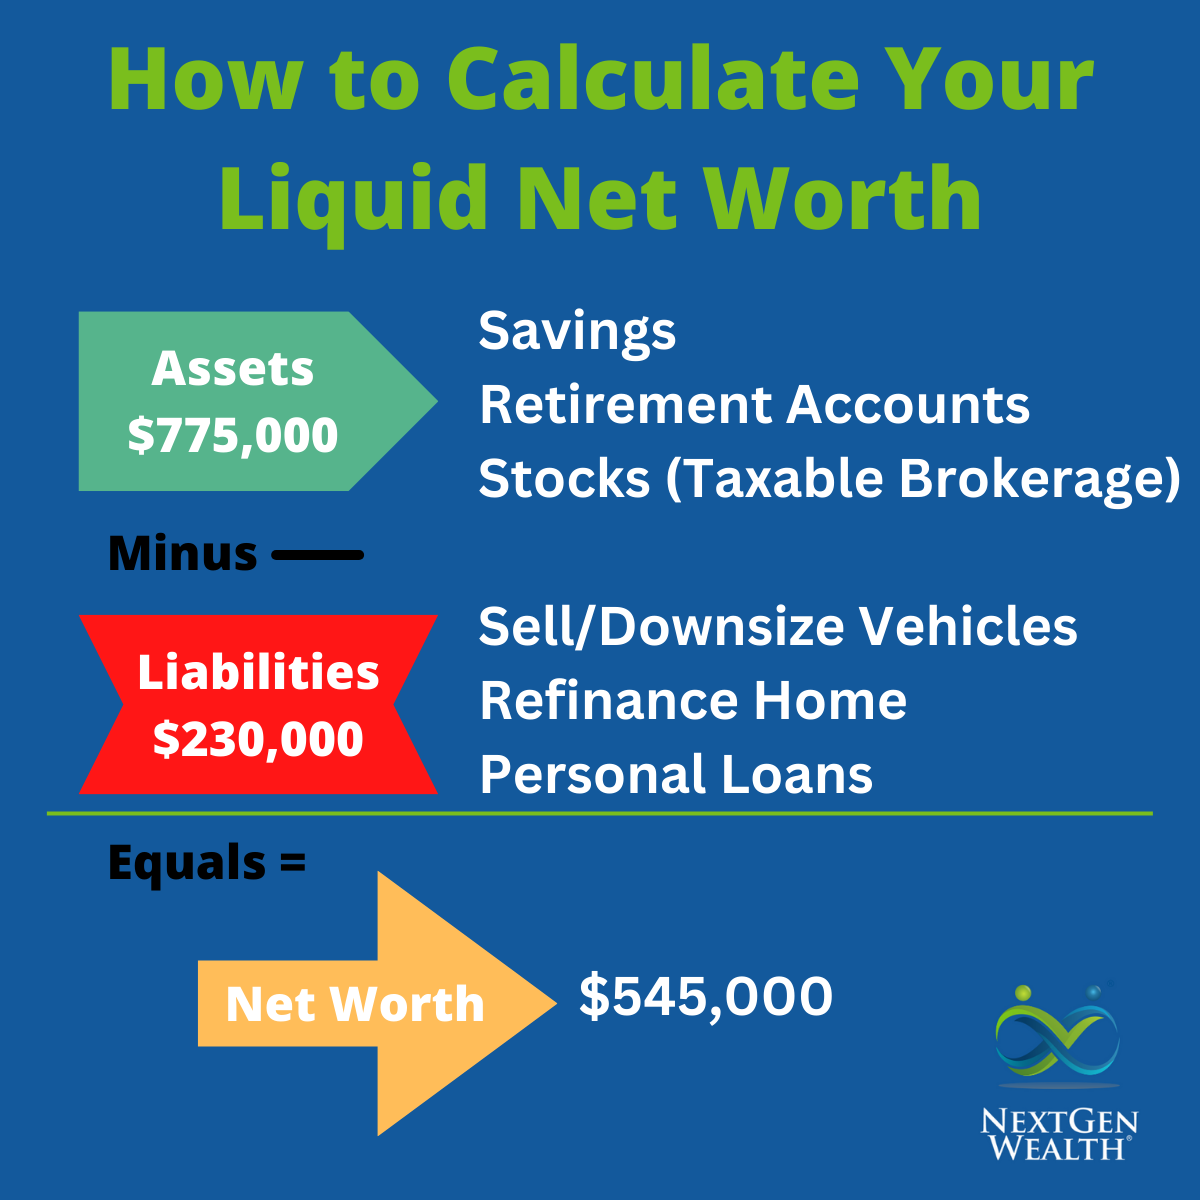 Net Worth - What It Is and How To Calculate It